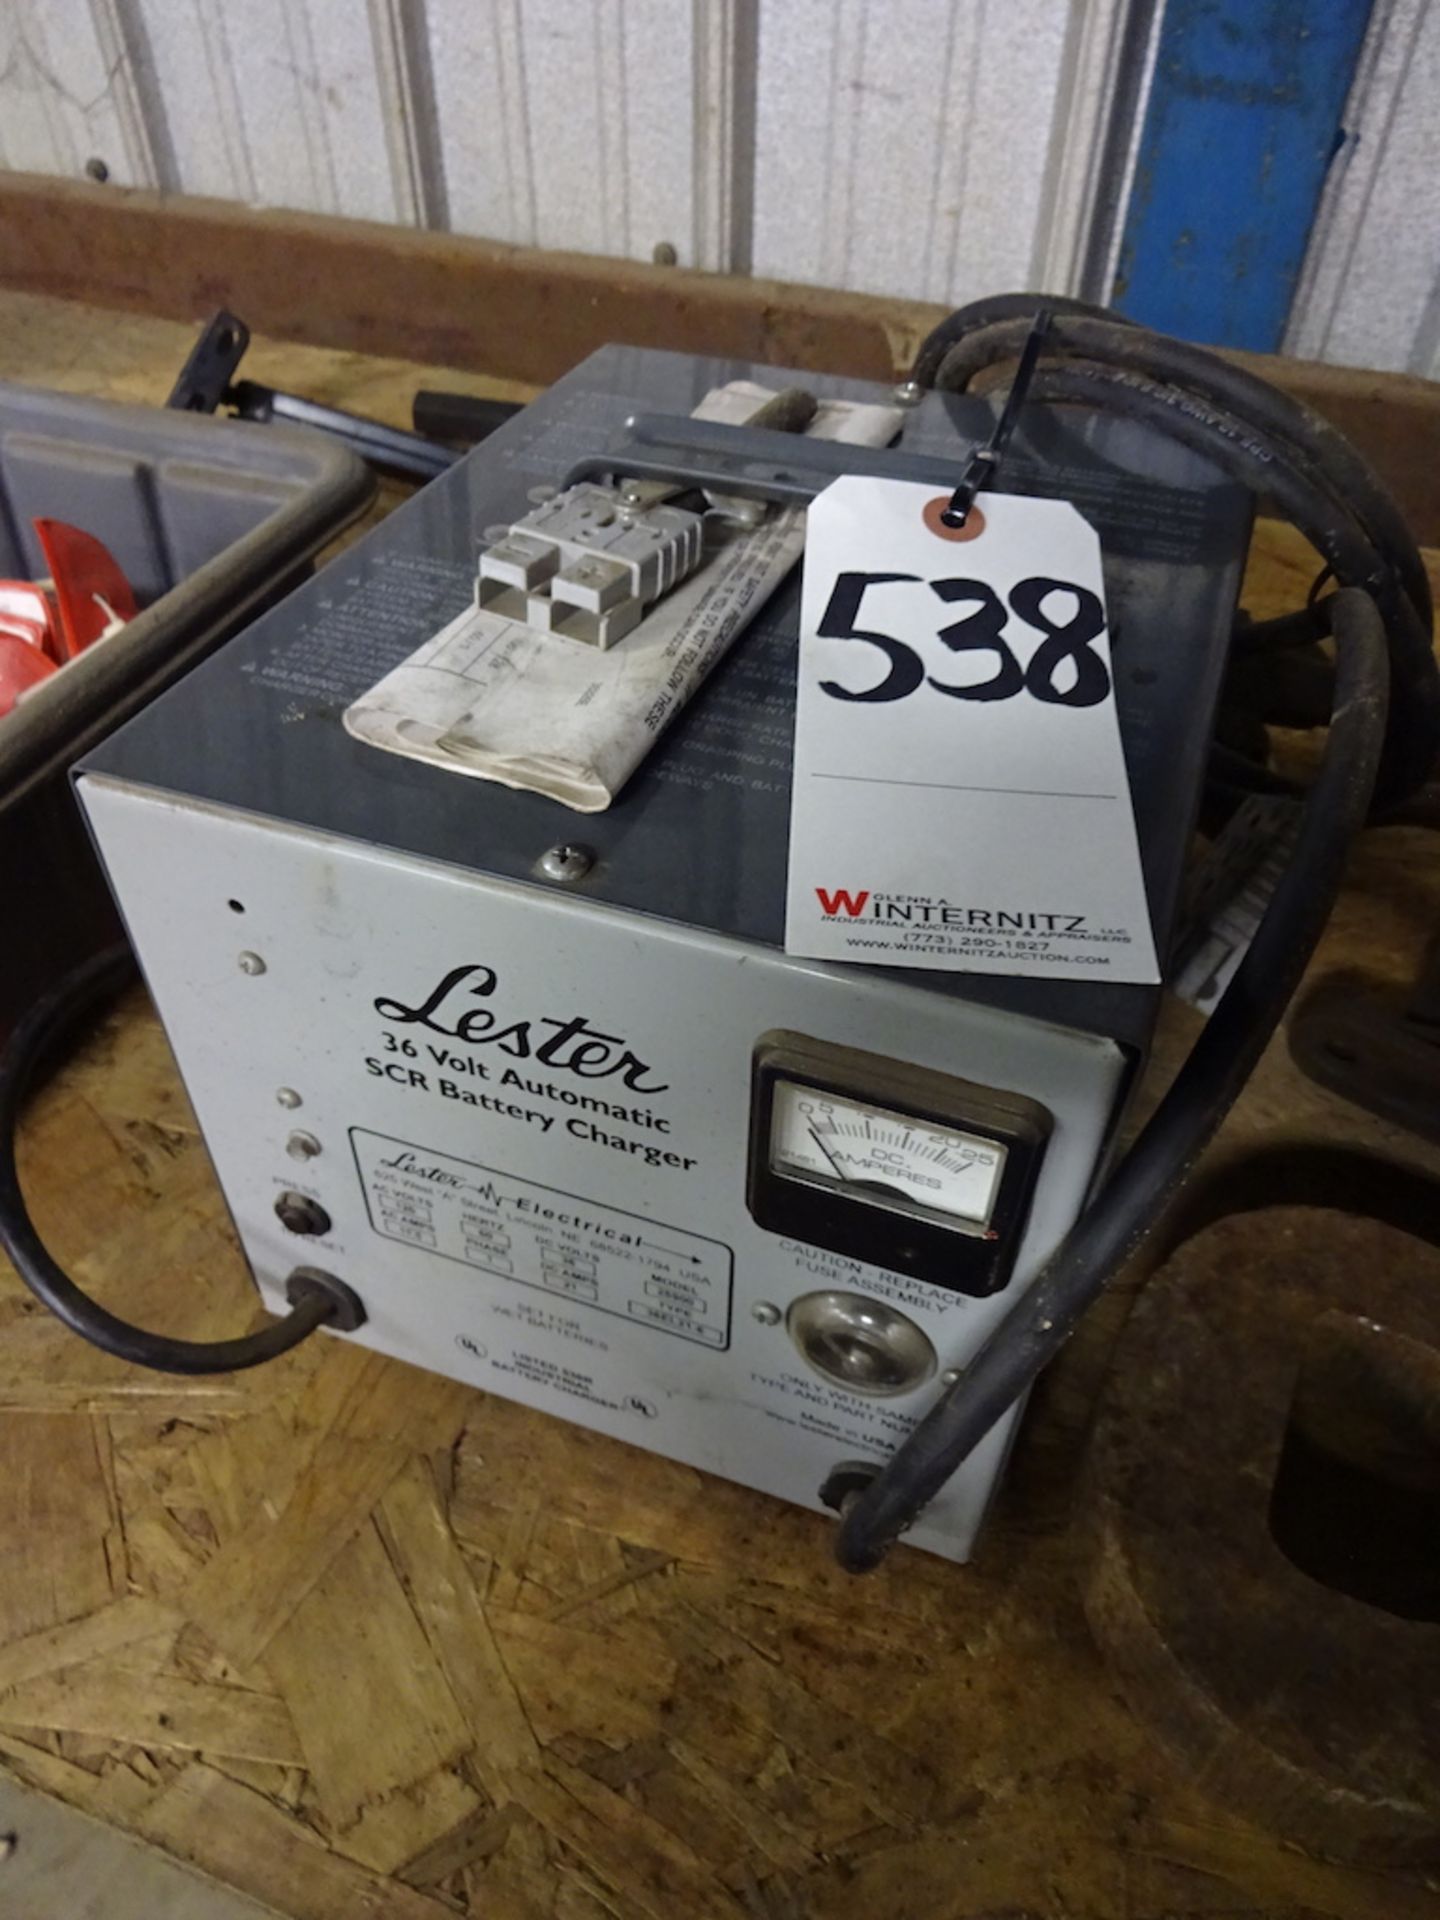 Lester 36 Volt Automatic SCR Battery Charger